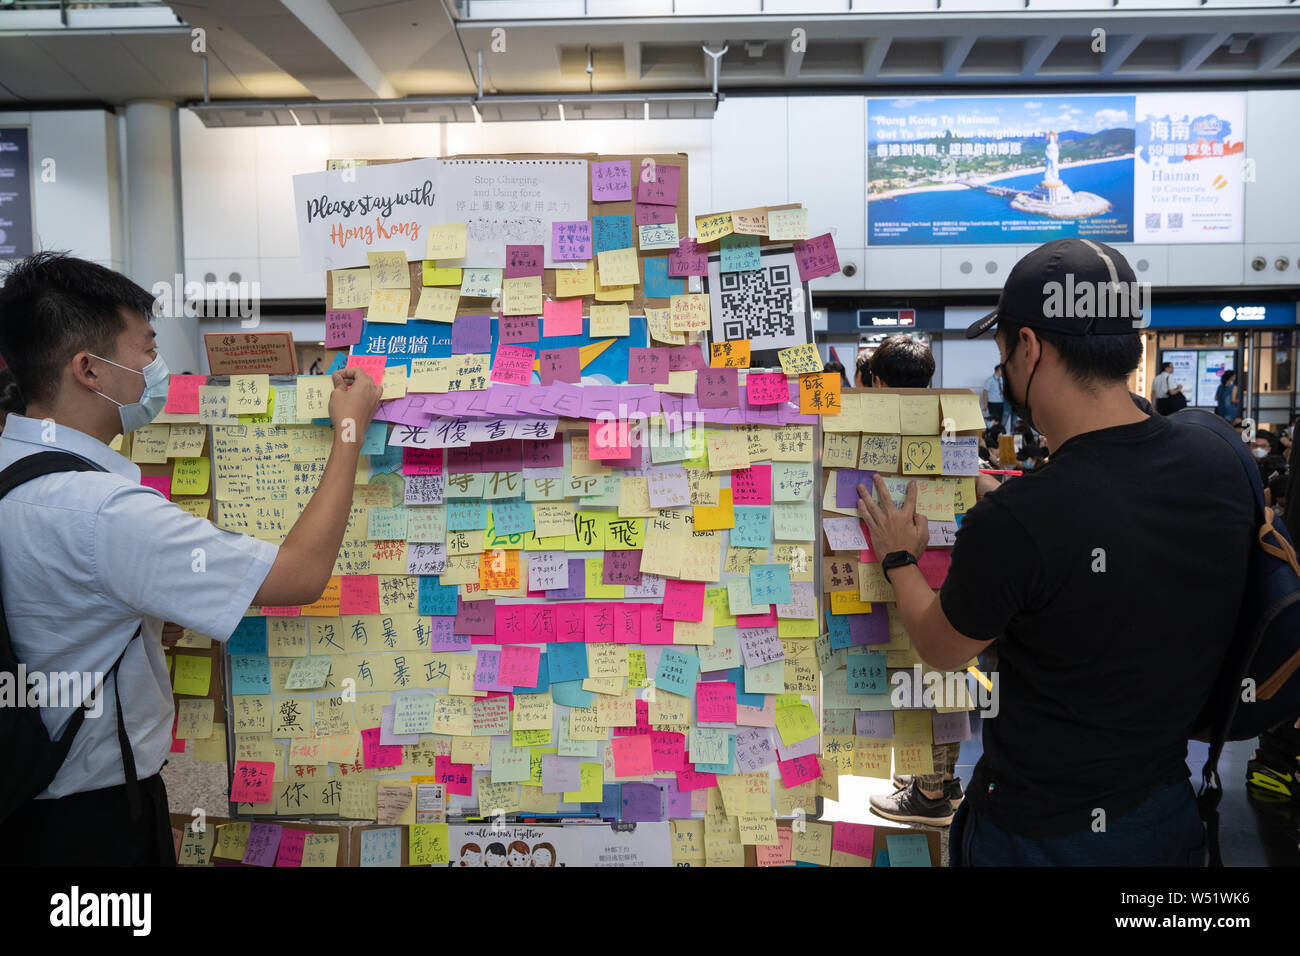 Demonstrators put sticky note on a pop up Lennon wall during the protest at the airport arrival hall.Hundreds of anti government protesters staged a sit in protest at the Hong Kong international airport terminal, the first of three straight days of demonstrations after clashes last week triggered fears that a wider confrontation could erupt in the city. Stock Photo